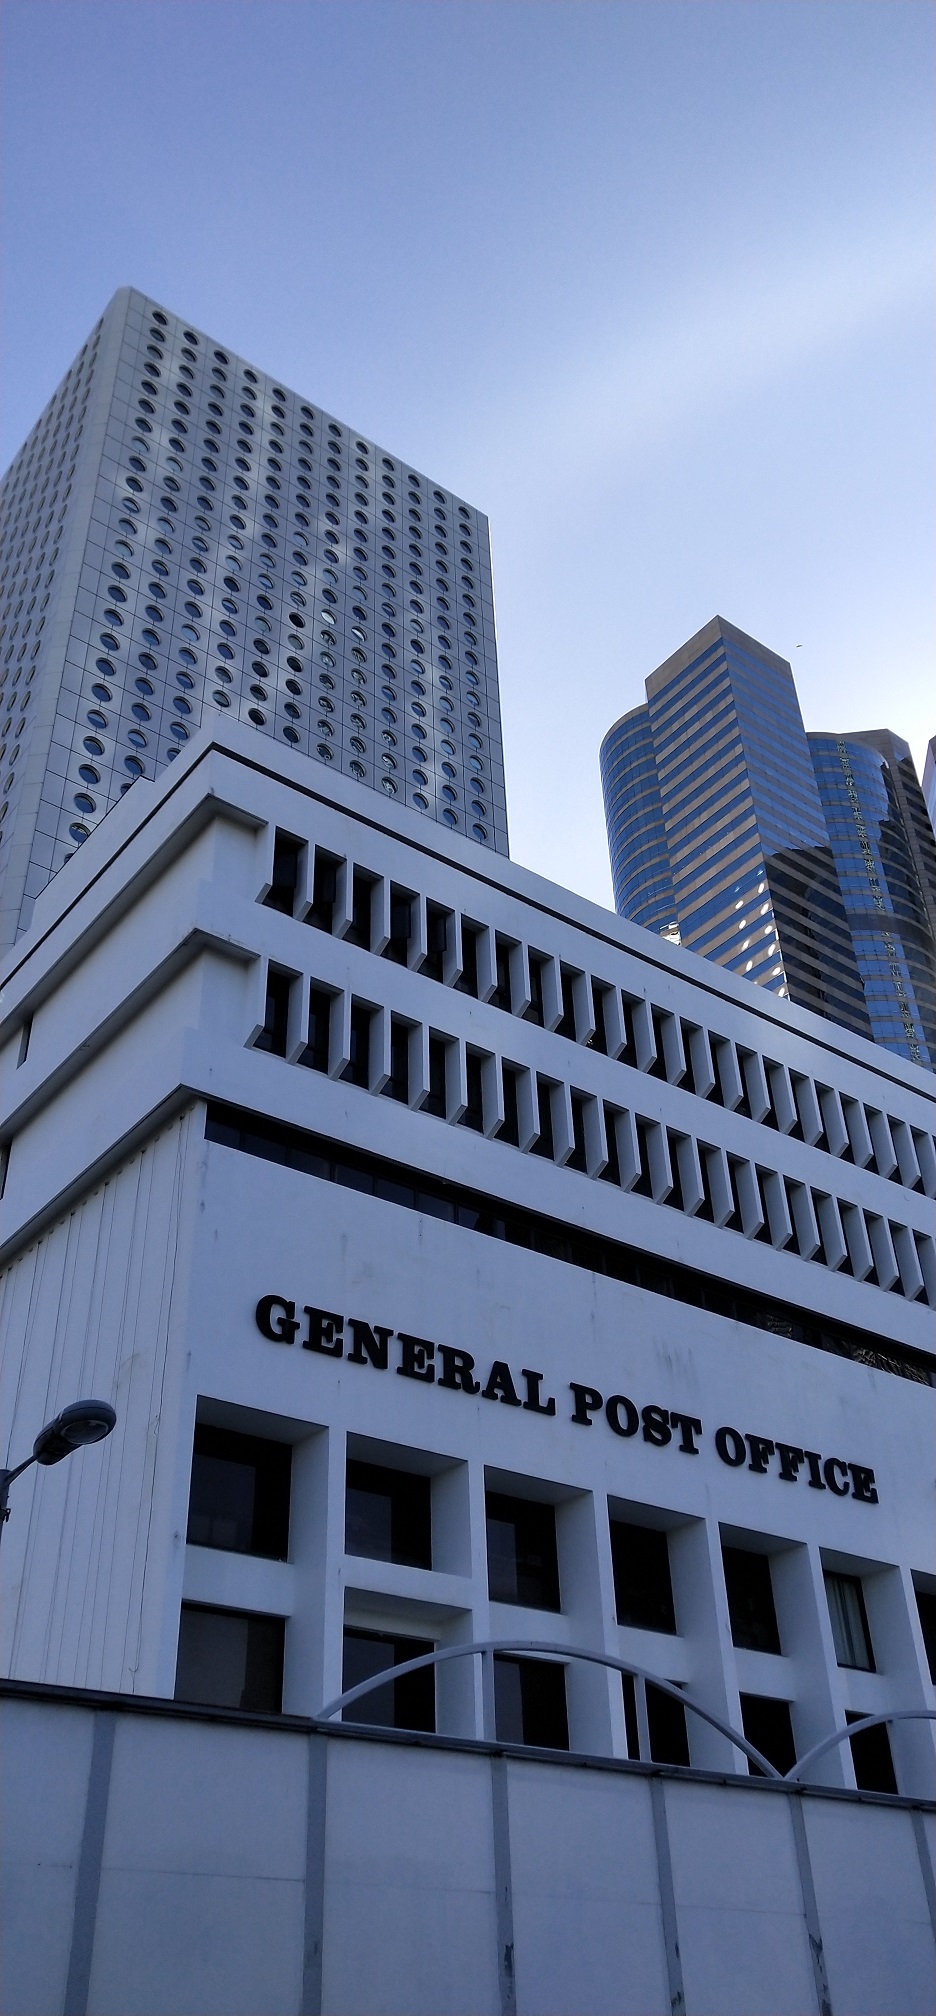 The short General Post Office does not block the sea view of Jardine House